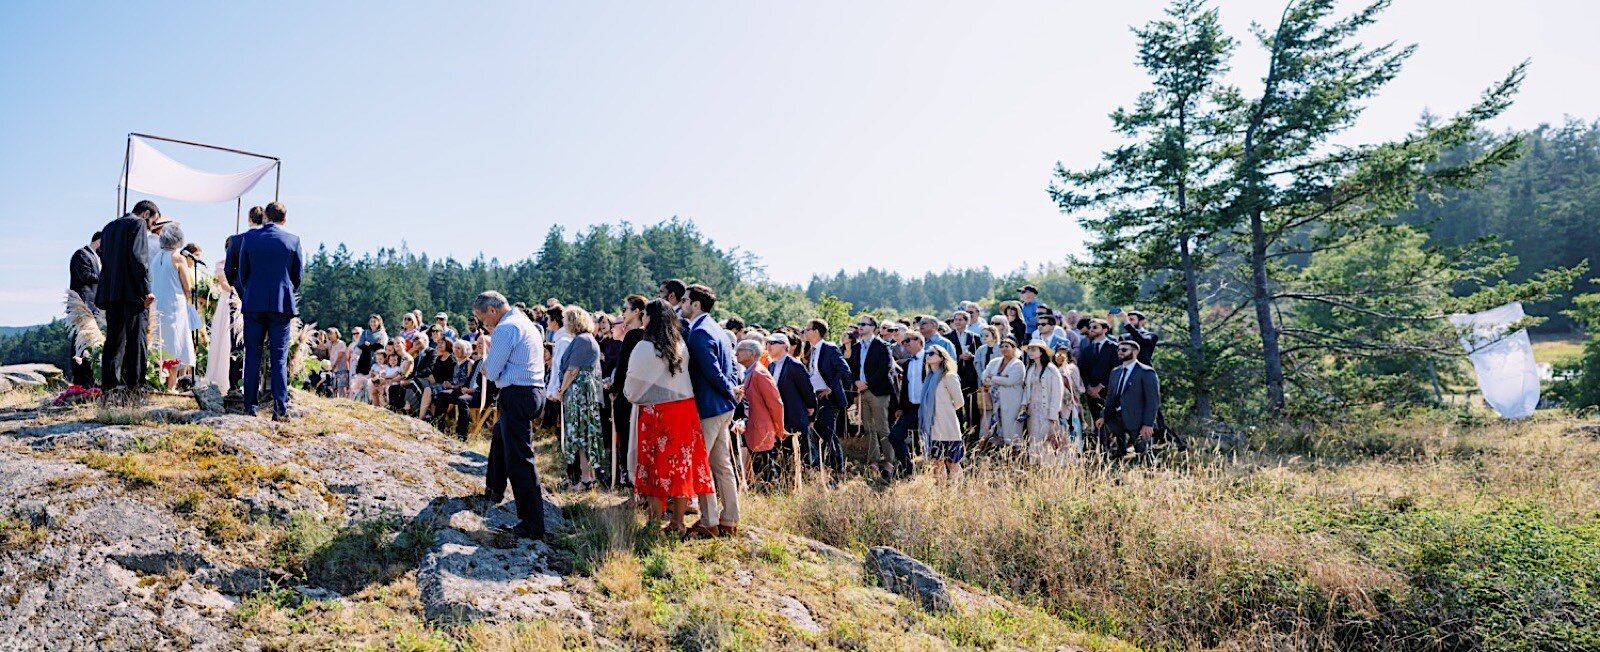 37_Island_private_a_cliff_Orcas_ceremony_Water_On_the_Intimate_Wedding_Outdoor_Over.jpg